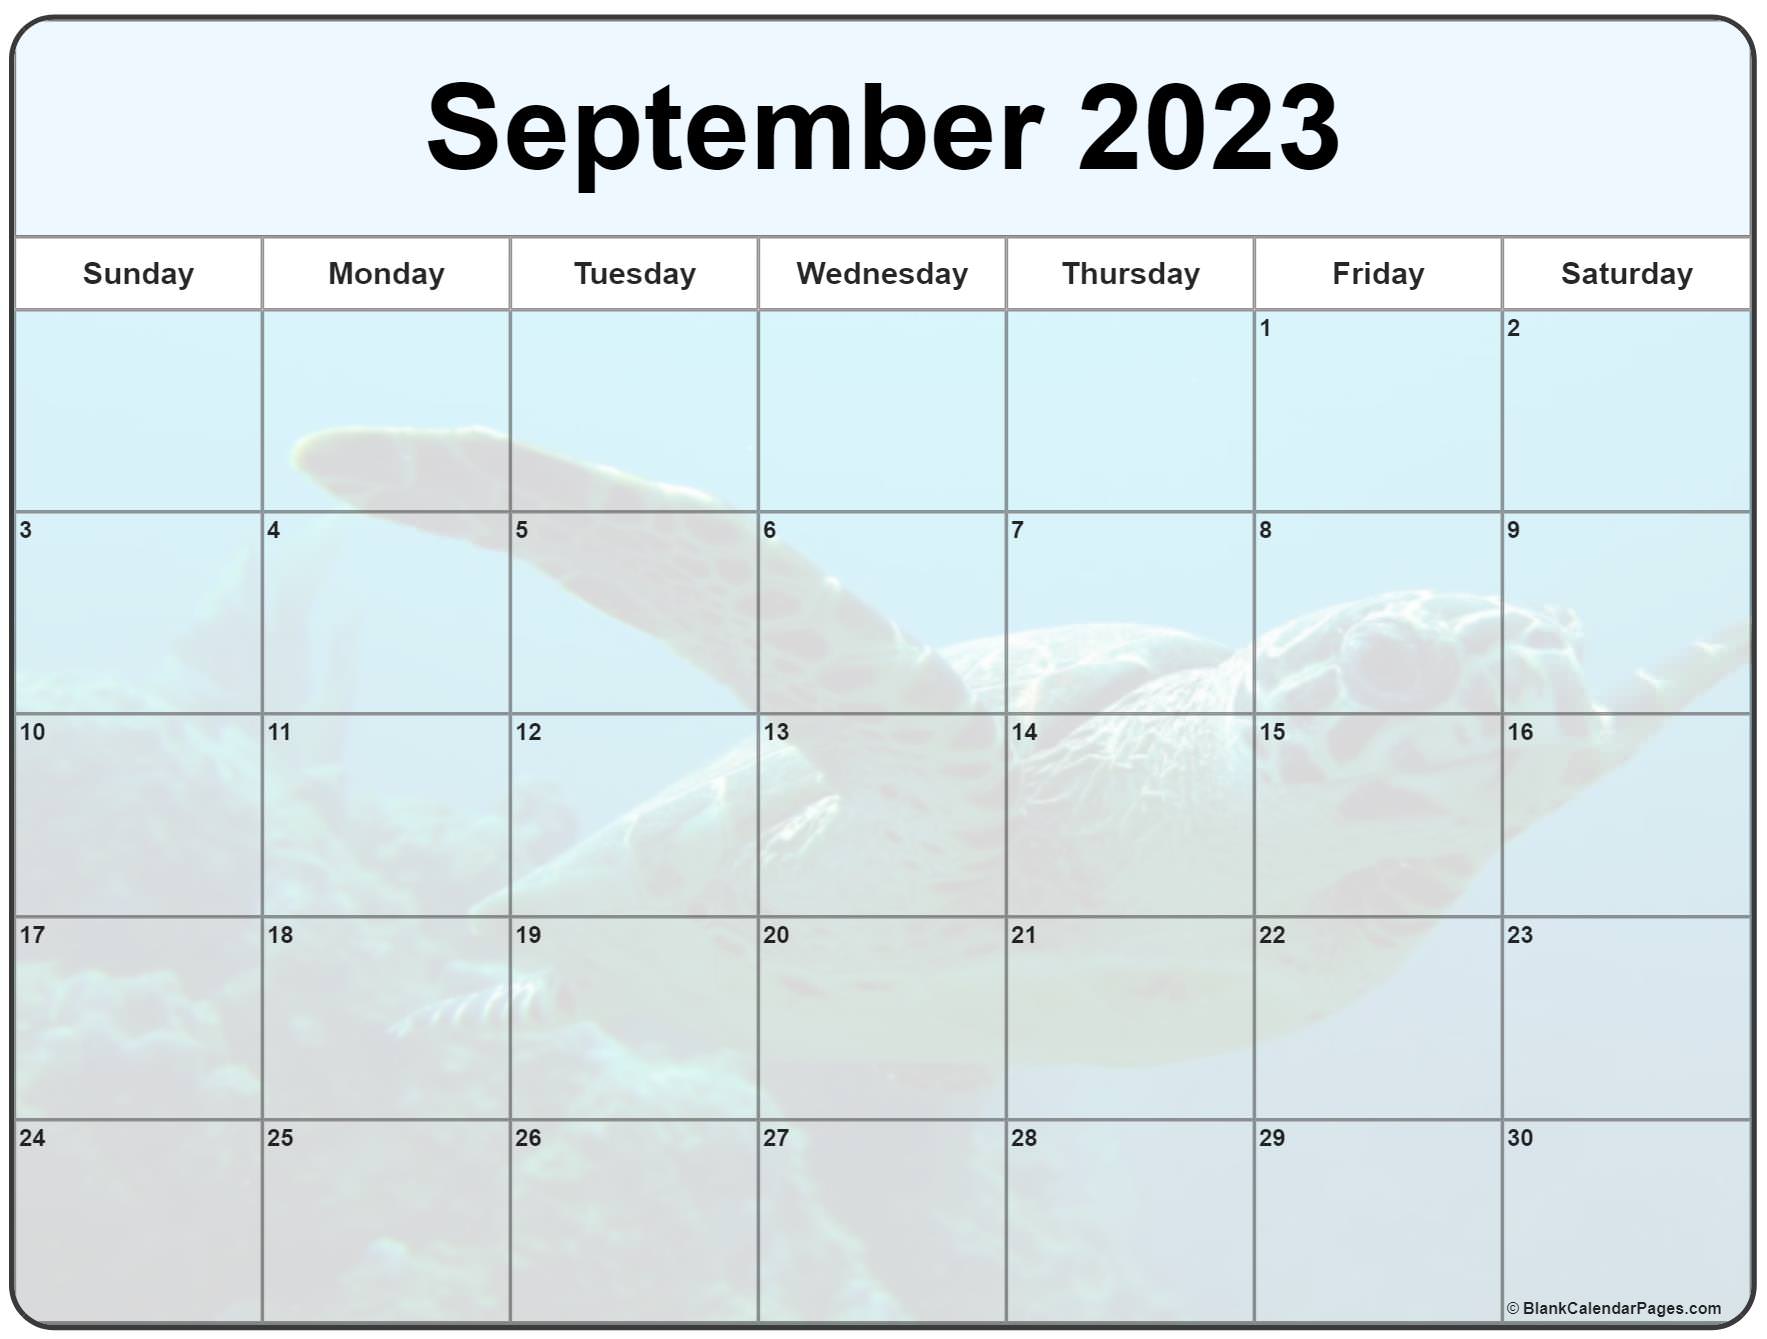 collection of september 2023 photo calendars with image filters